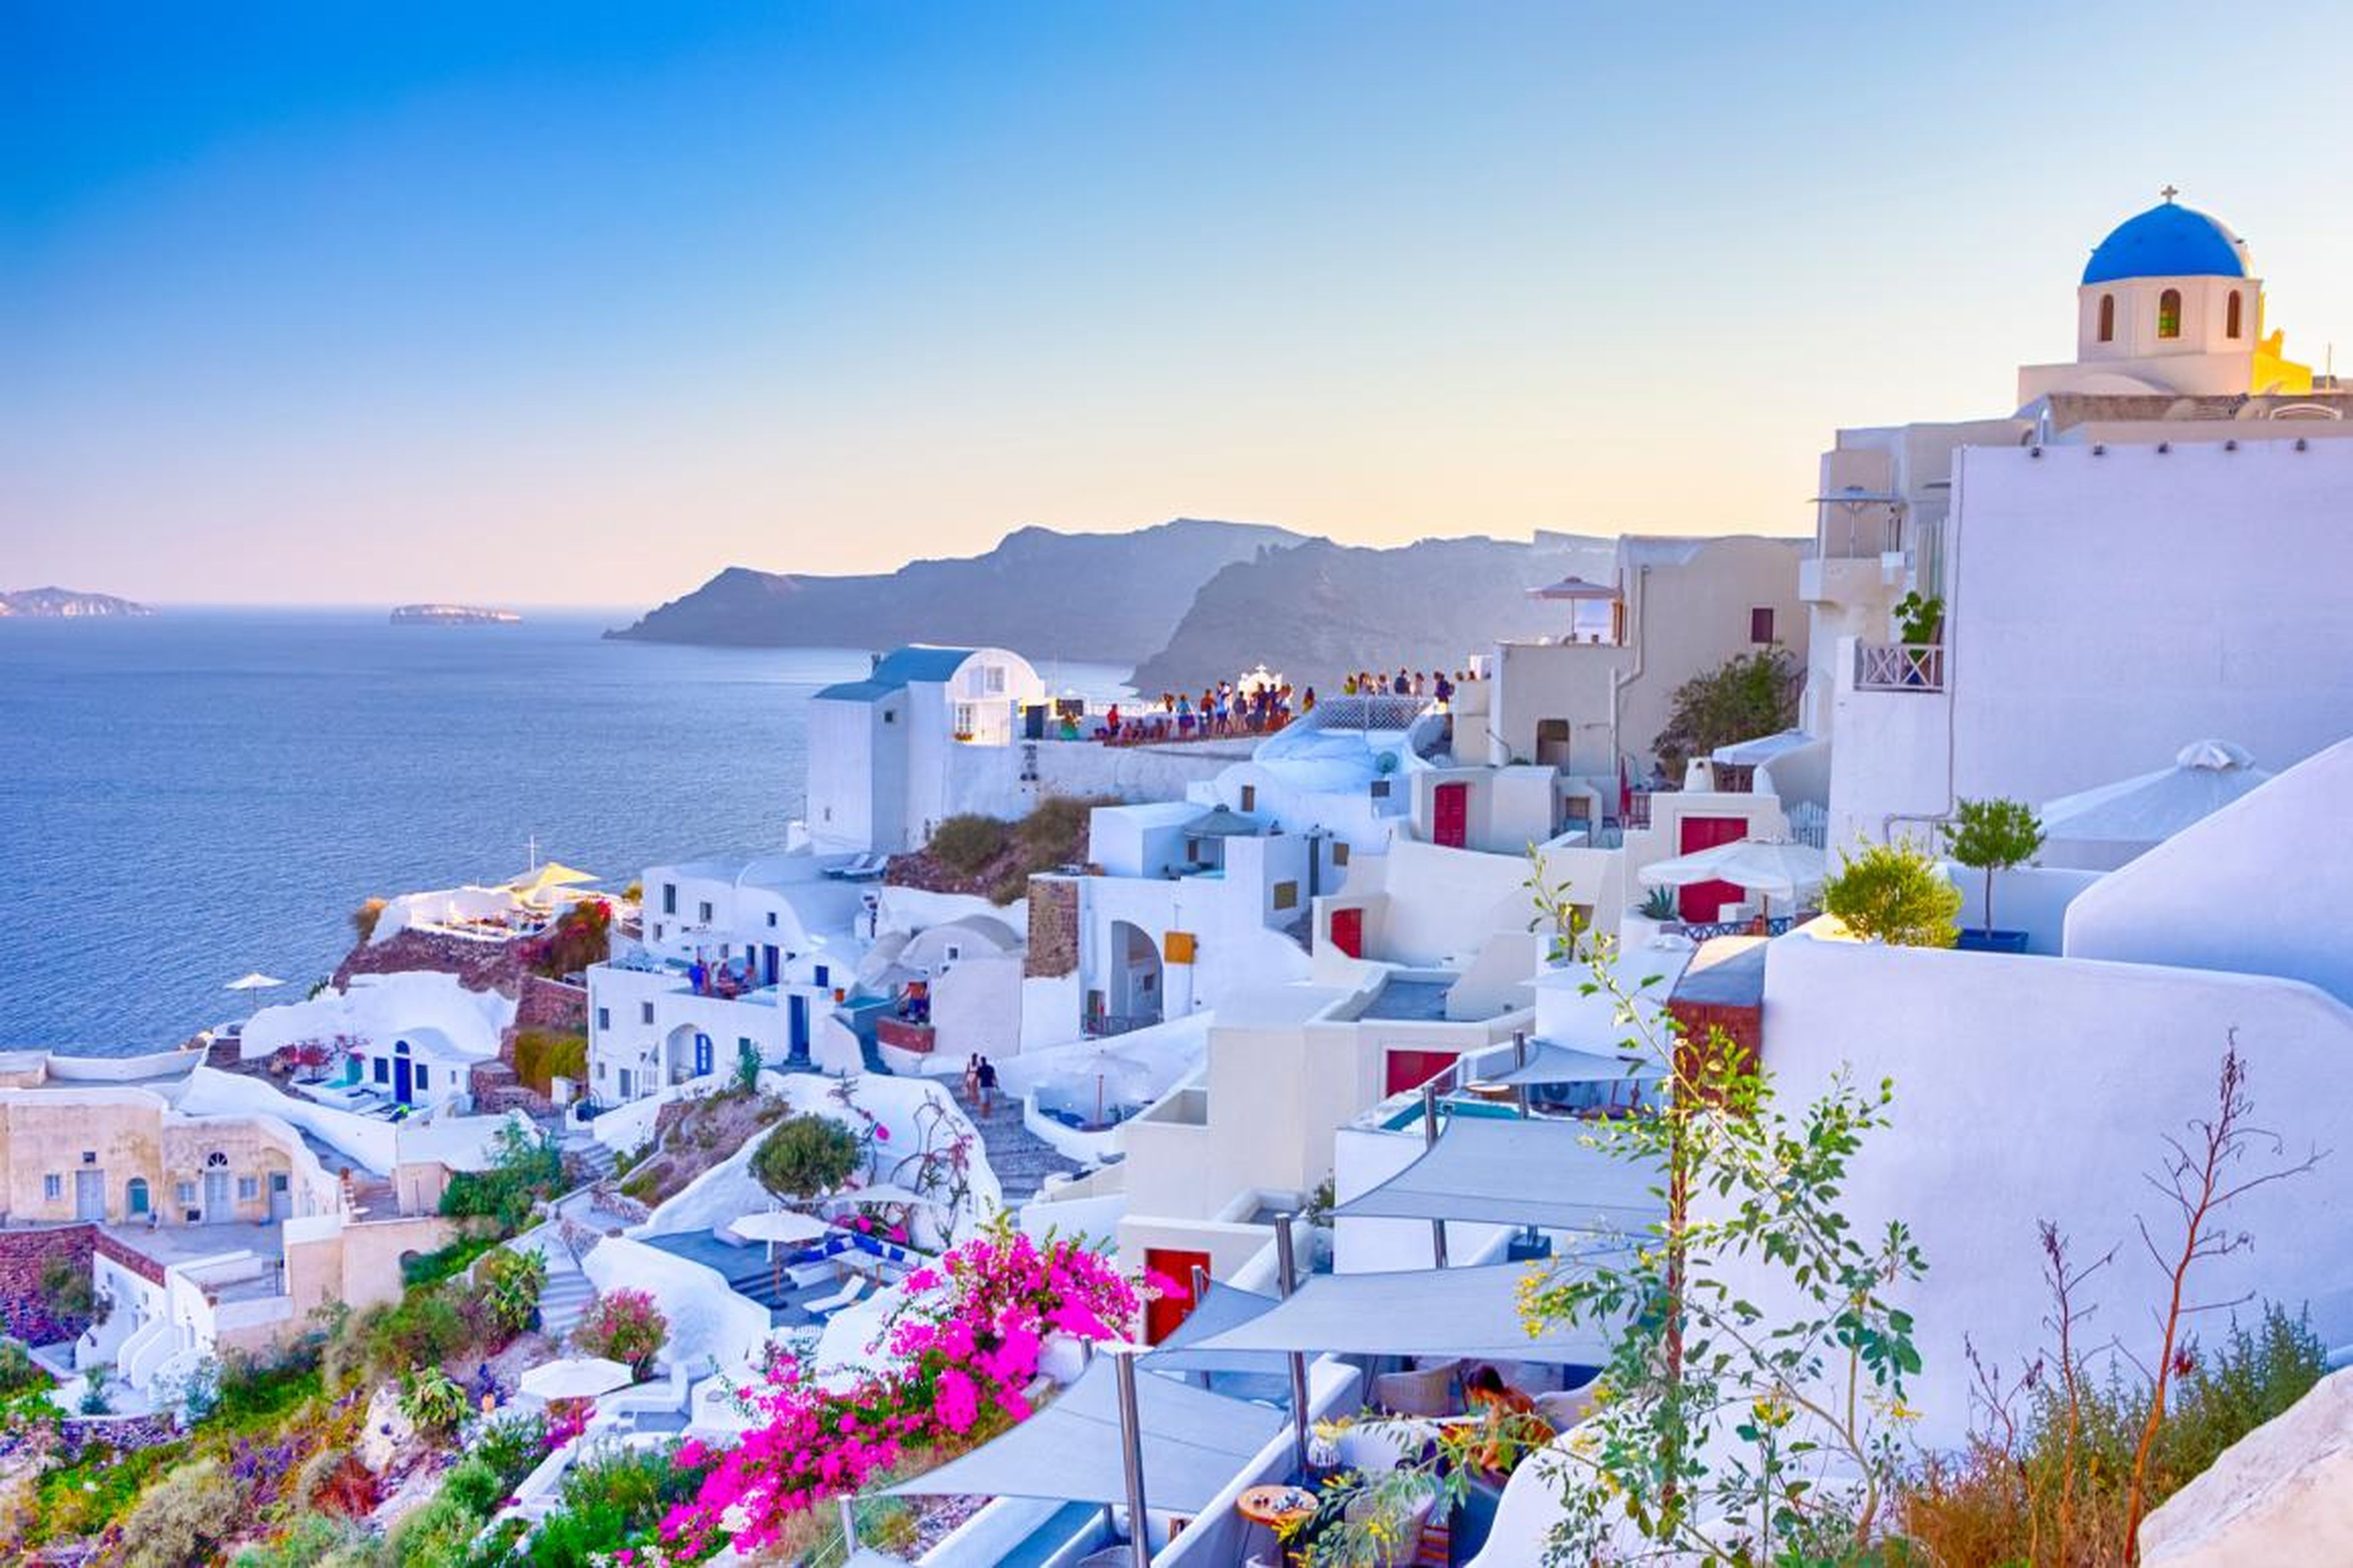 Places like Santorini, Greece, are almost too picturesque, leading to overcrowding from tourists.